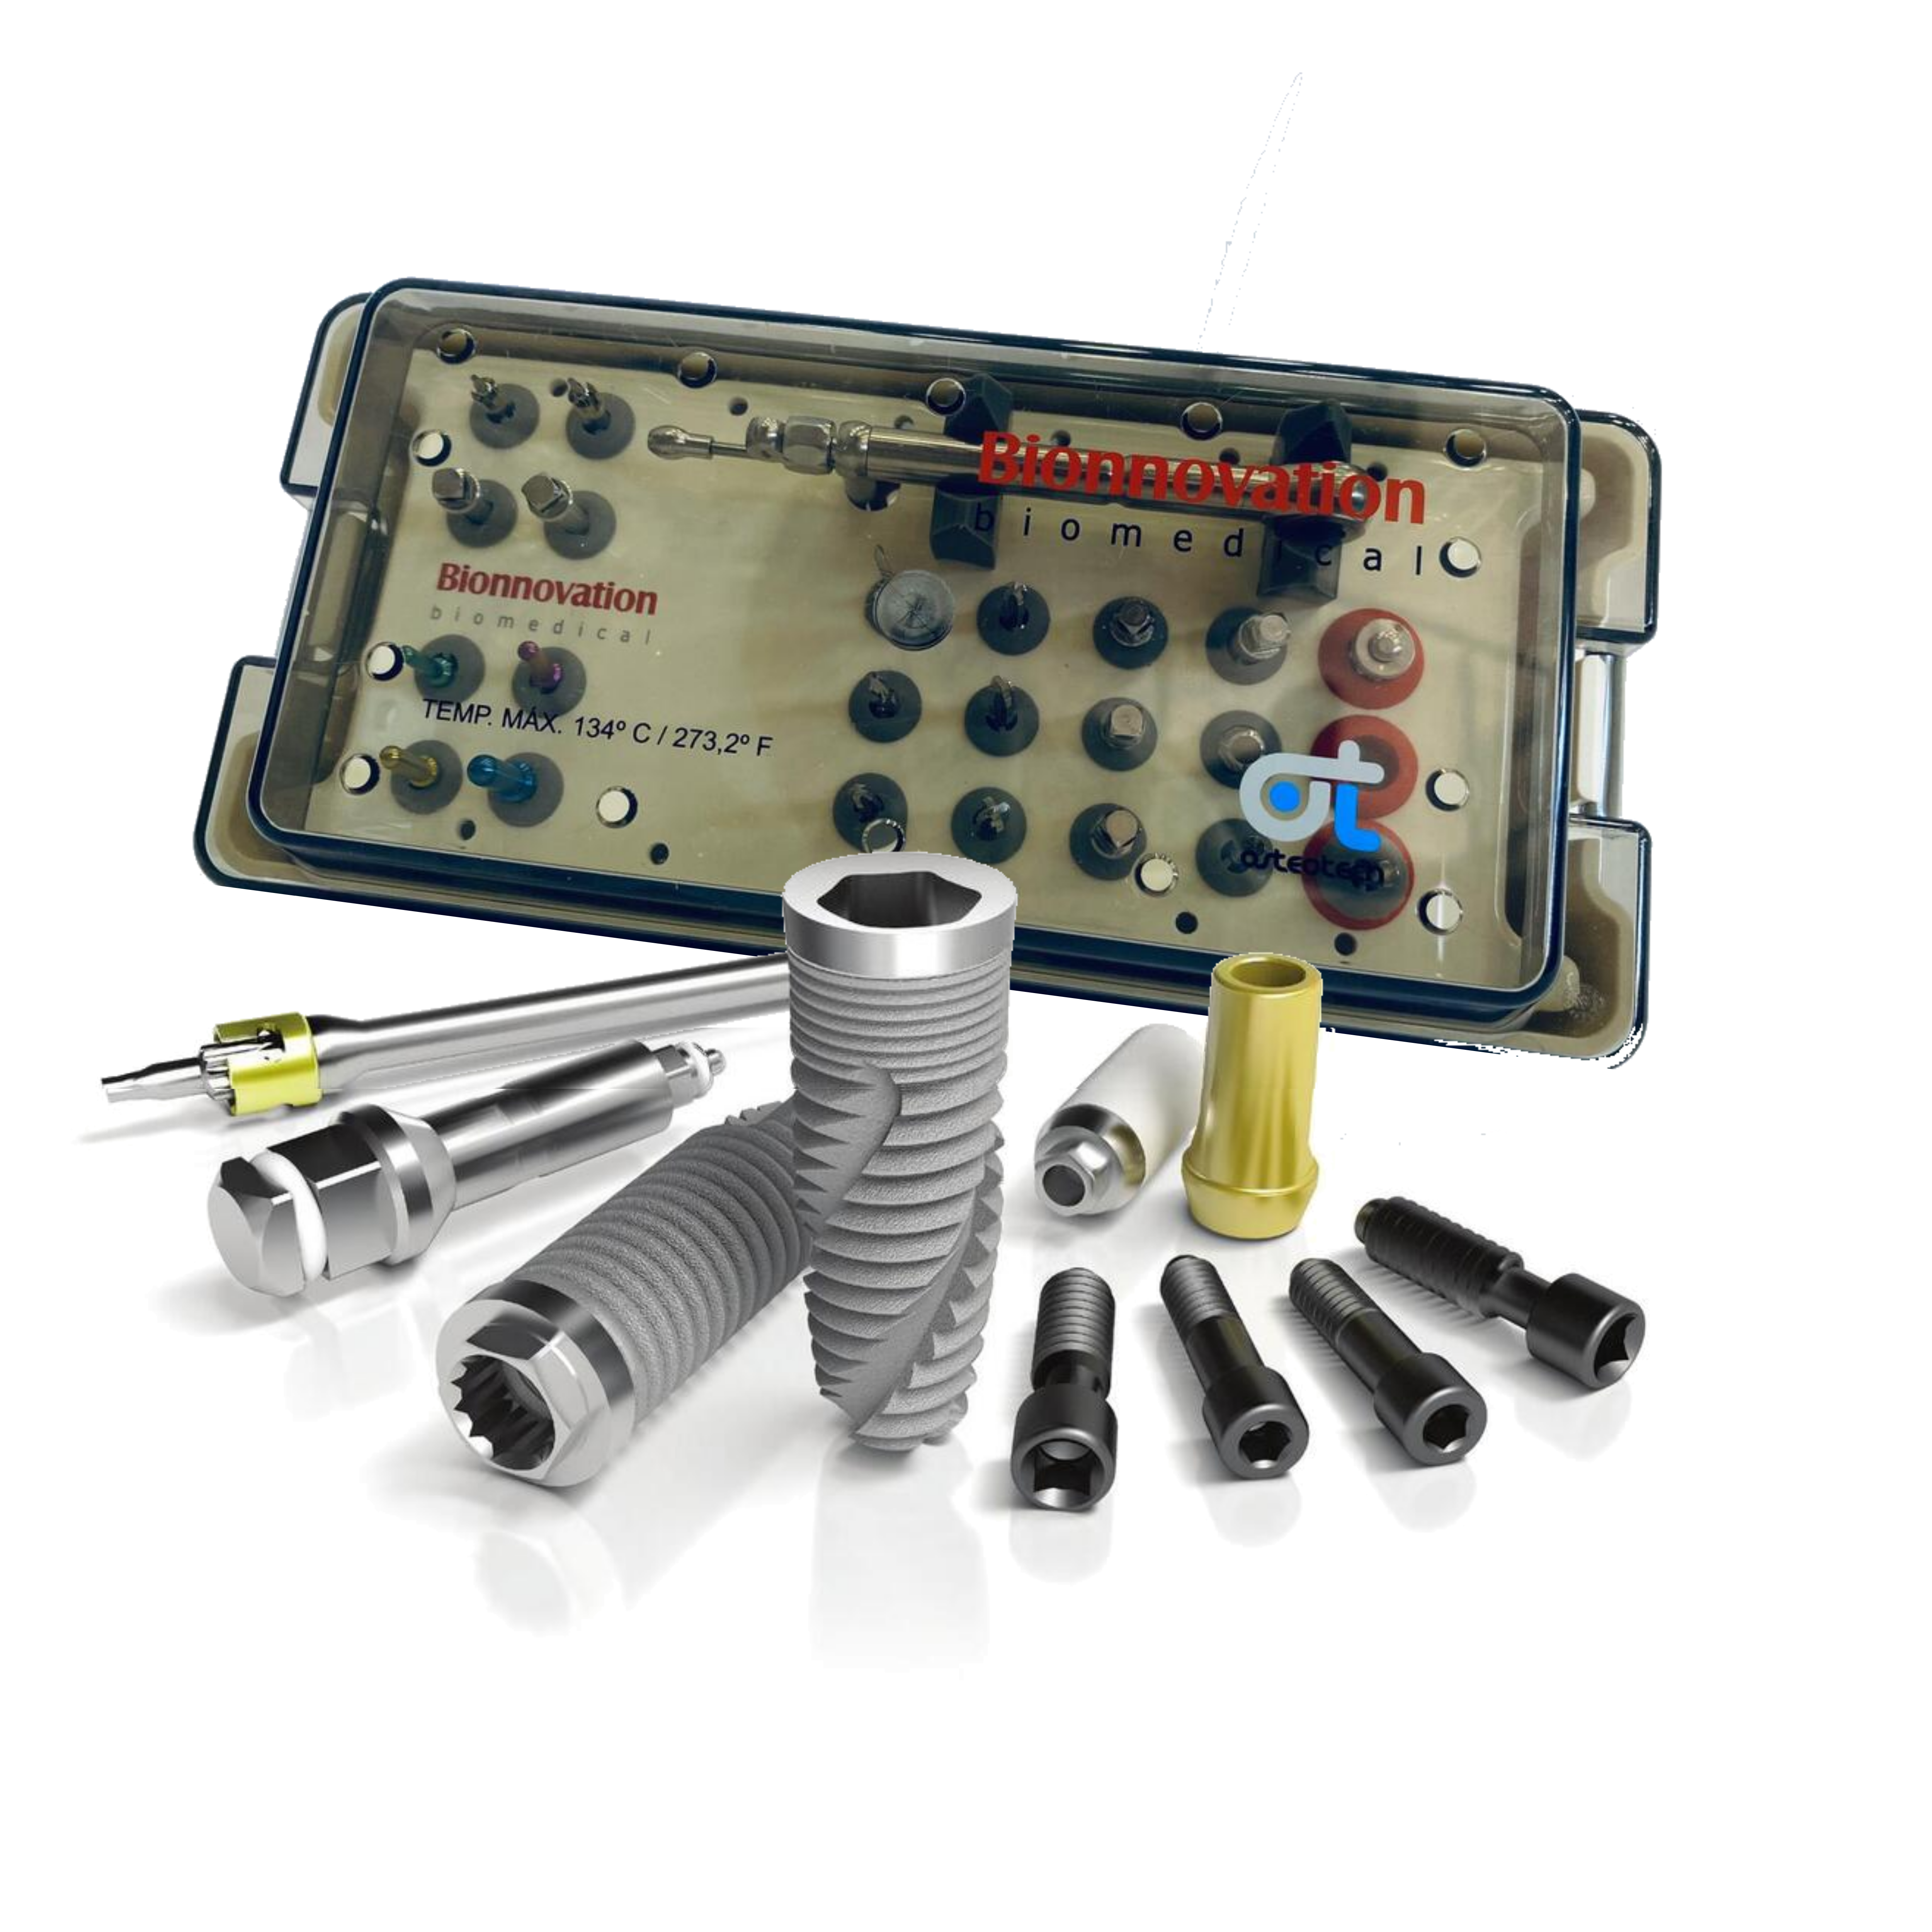 Implants - Surgical Kit Offer